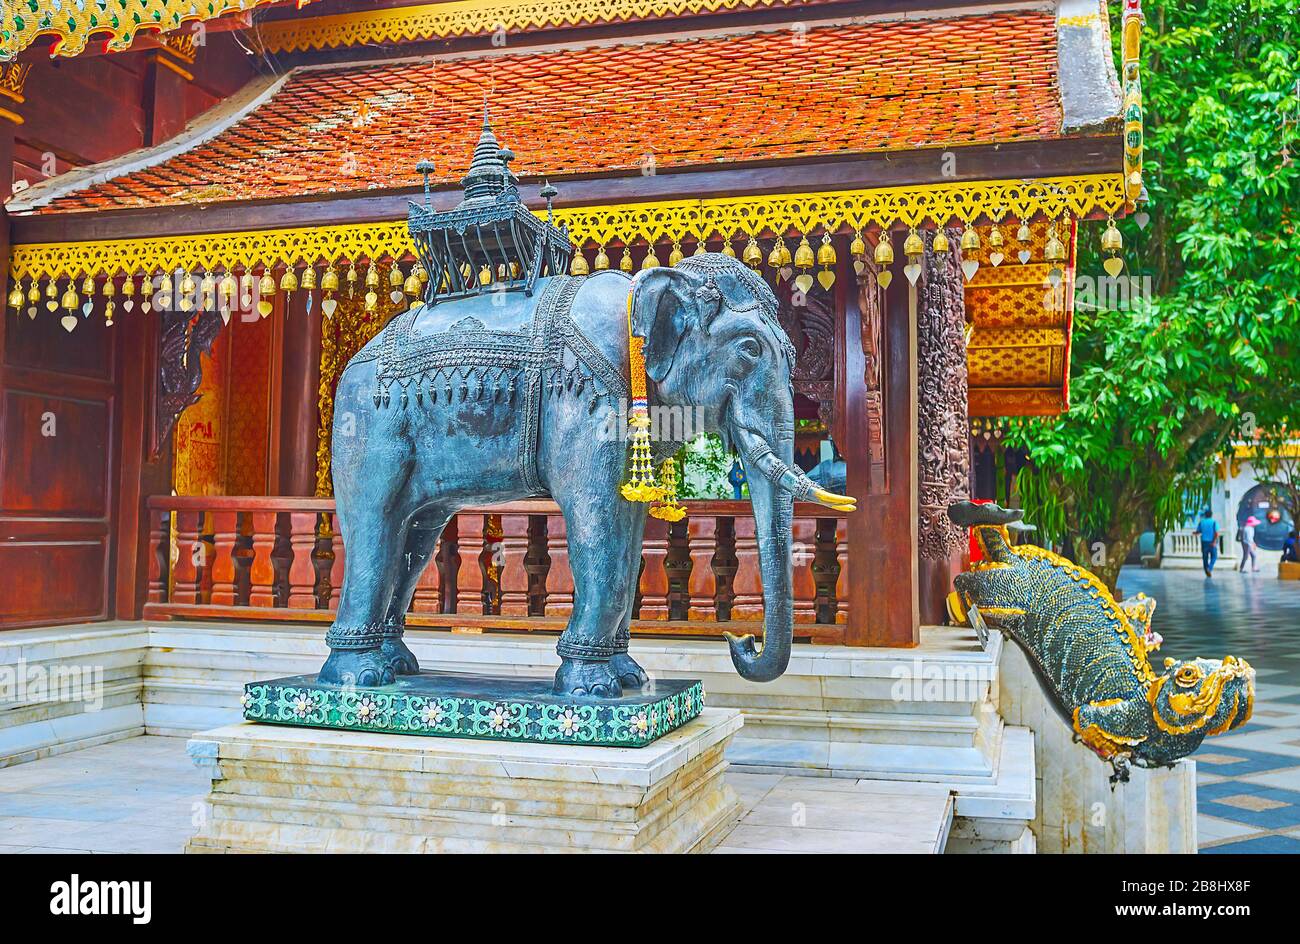 The bronze elephant statue at the side wall of Vihara (shrine), guarded by mom mythic creature, seen on background, Wat Phra That Doi Suthep temple, C Stock Photo